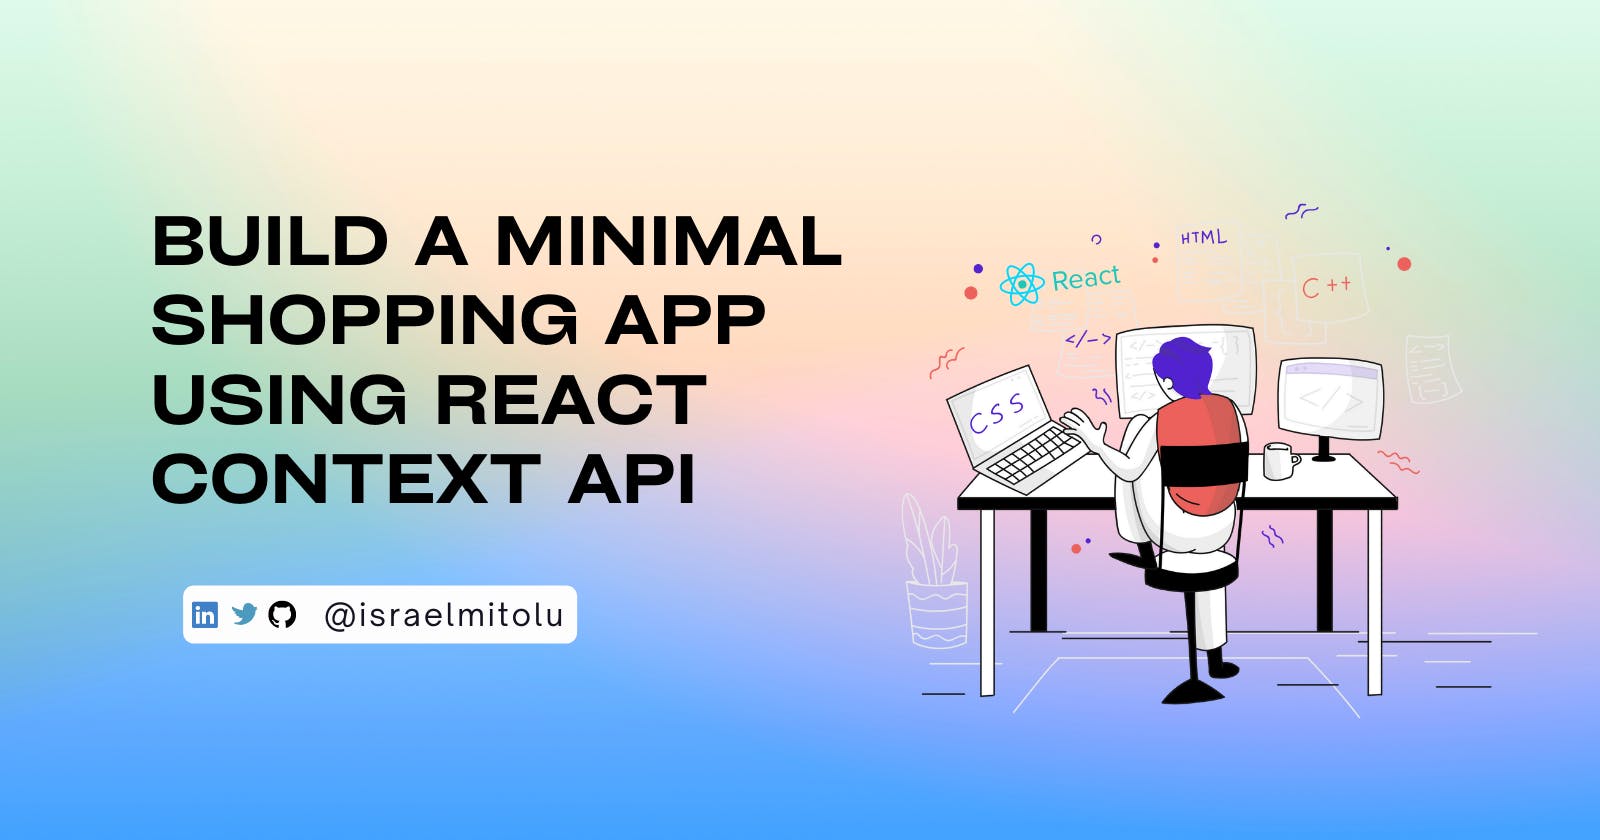 Learn how React Context API works by Building a Minimal Ecommerce Shopping App